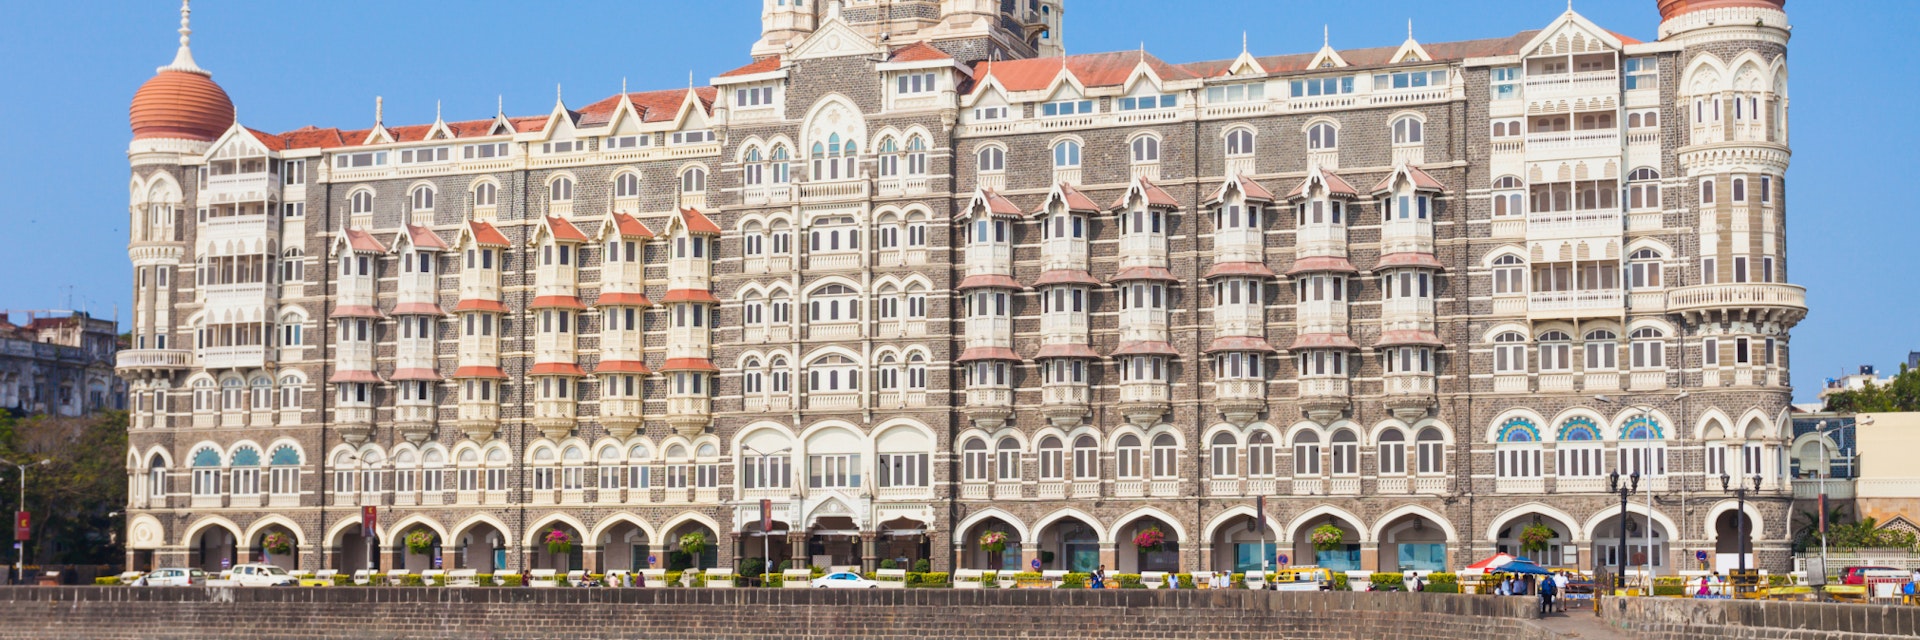 MUMBAI, INDIA - FEBRUARY 21: The Taj Mahal Palace Hotel on Febuary 21, 2014 in Mumbai, India; Shutterstock ID 214733773; Your name (First / Last): Lauren Gillmore; GL account no.: 56530; Netsuite department name: Online-Design; Full Product or Project name including edition: 65050/ Online Design /LaurenGillmore/POI